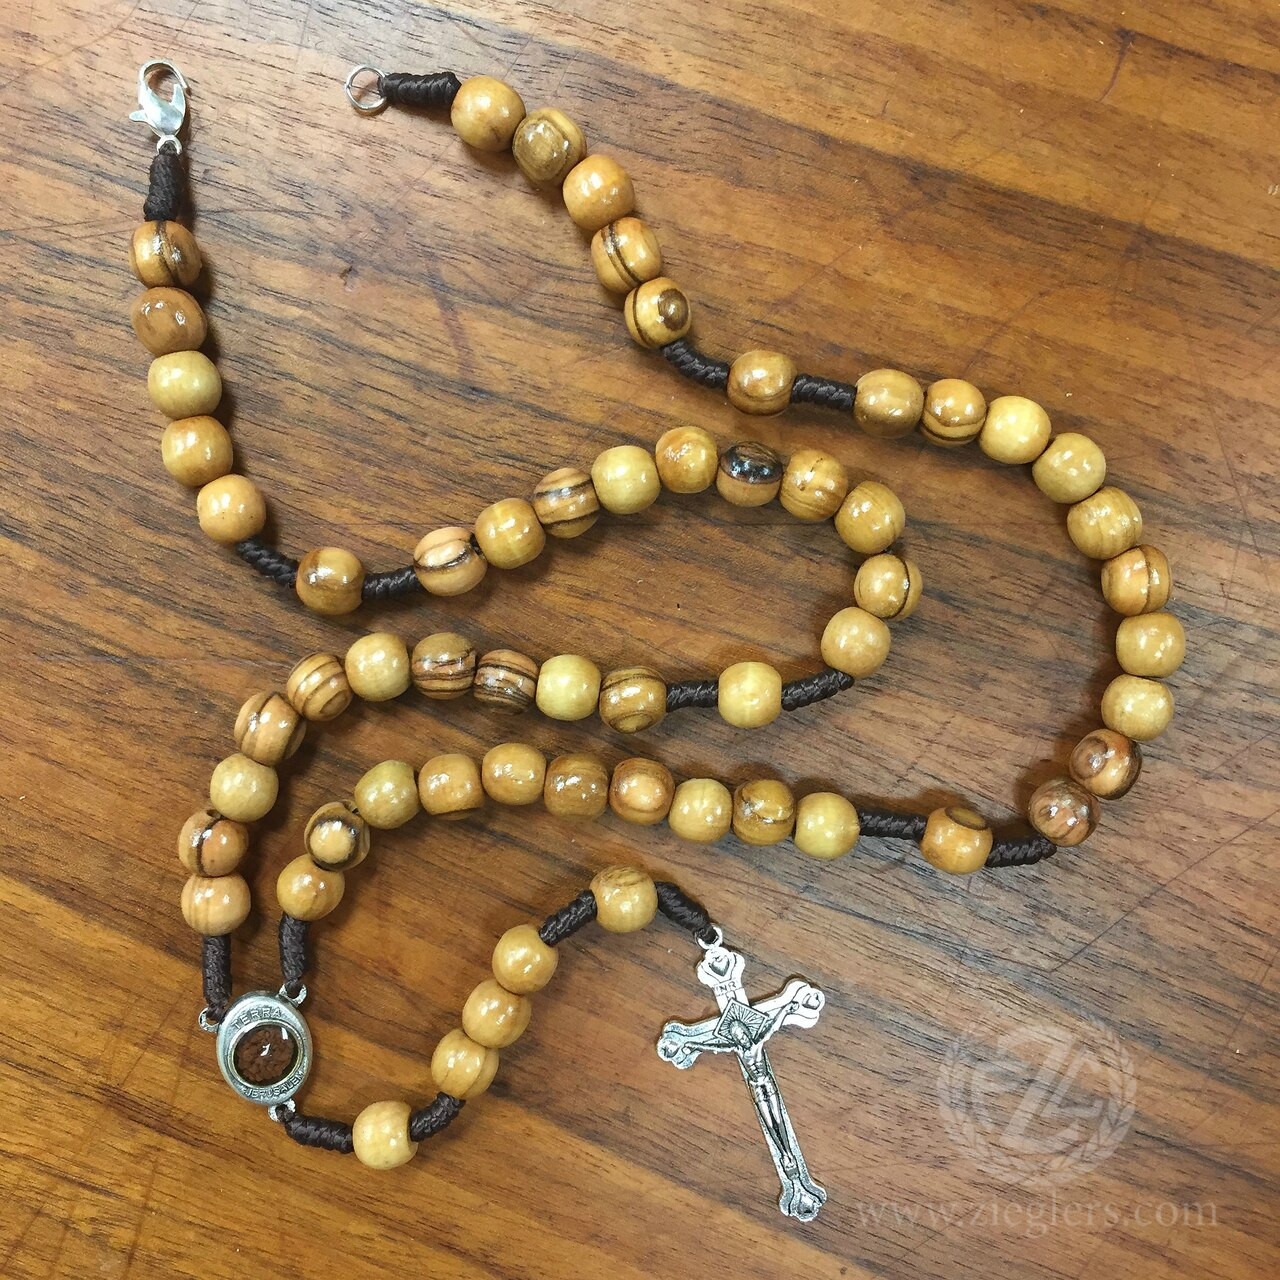 Rosary Making Kit Catholic Rosary Cord Rosary Knot Rosary Confirmation Gift  Catholic Gift First Communion 